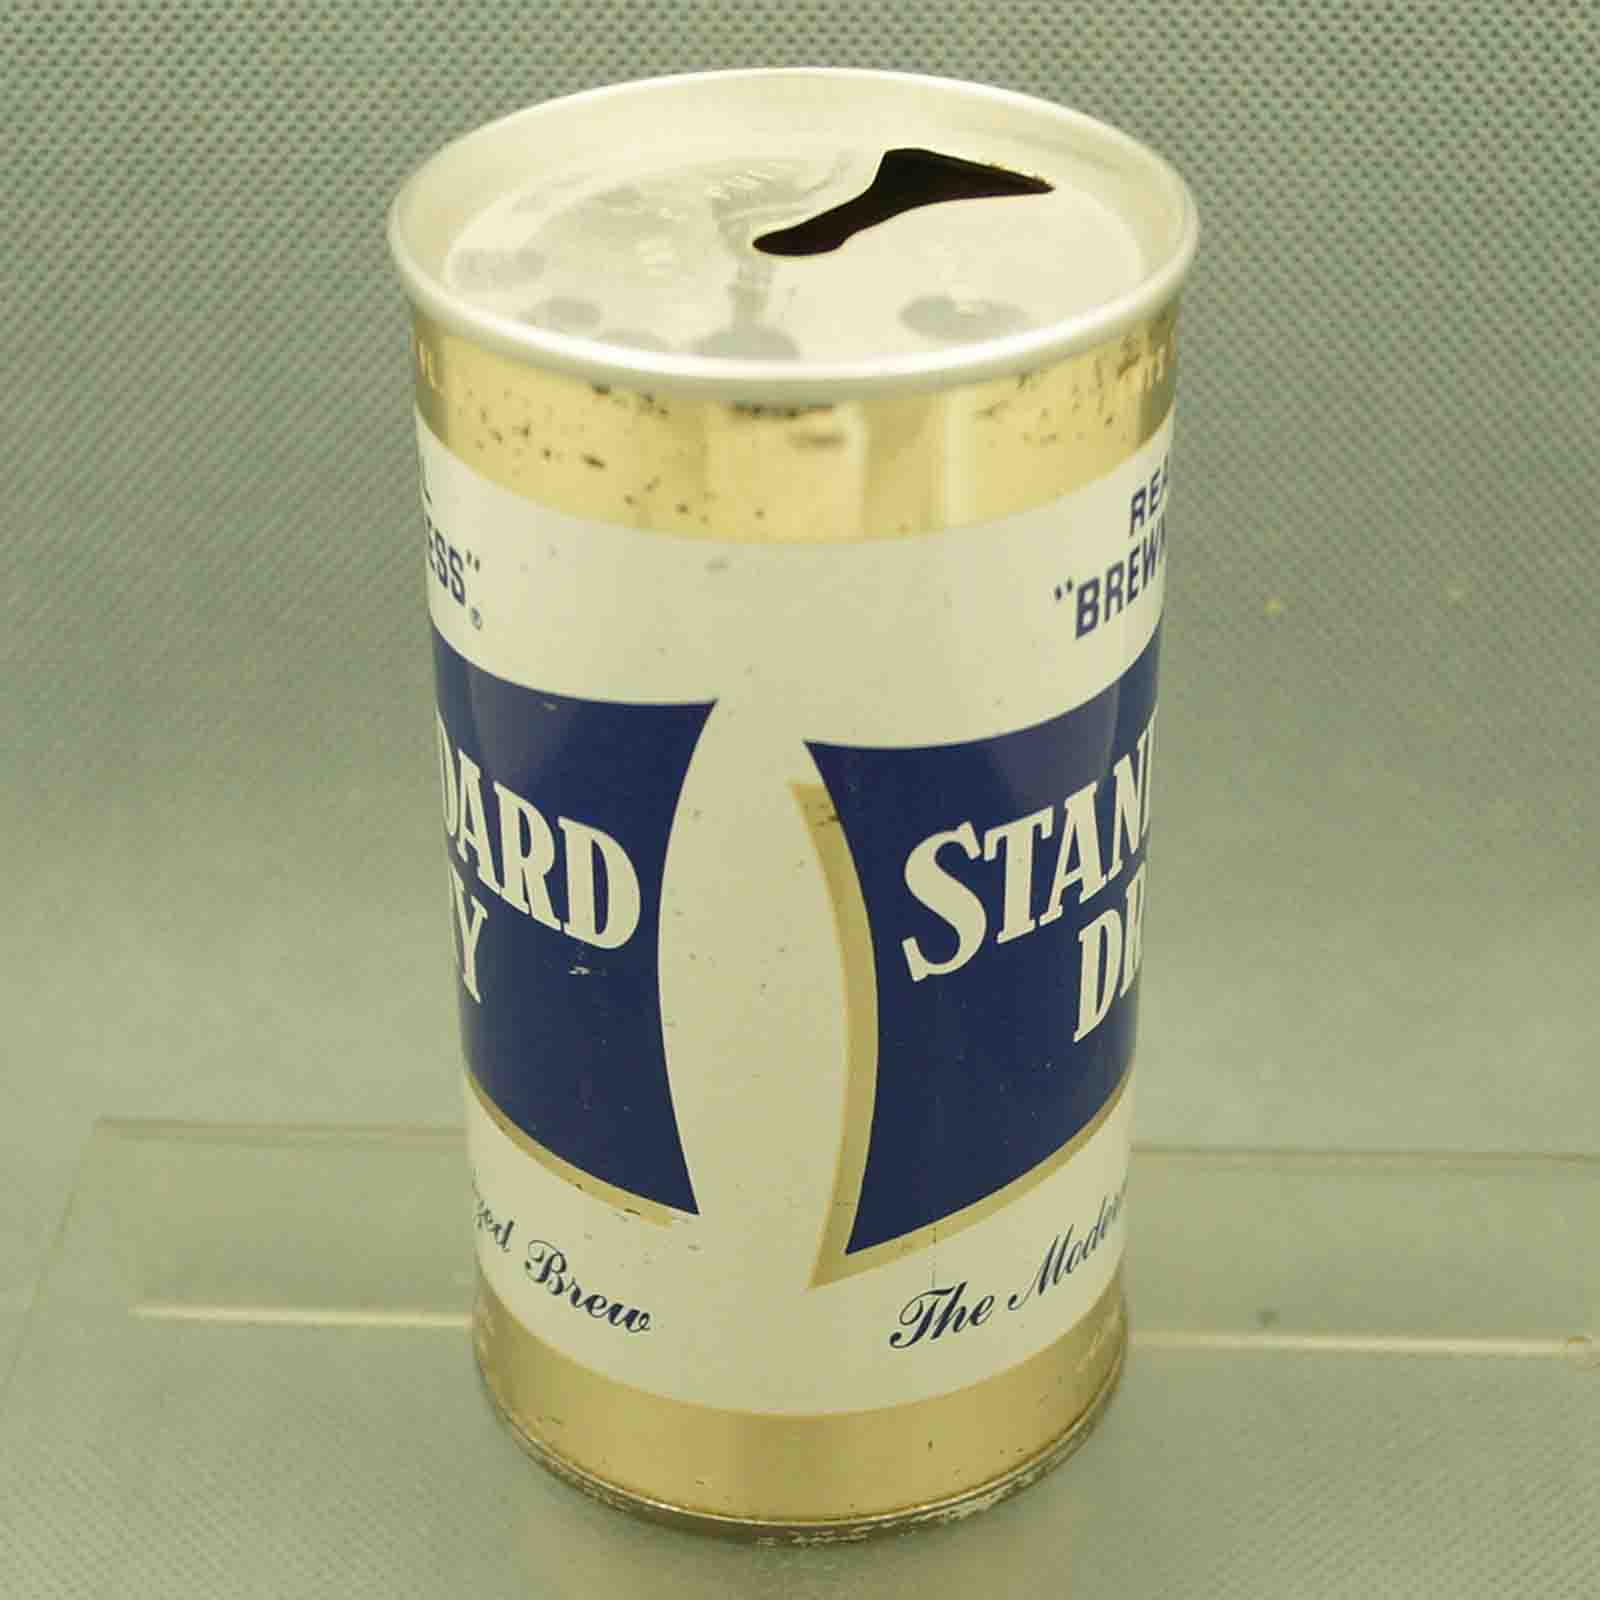 standard dry 126-9 pull tab beer can 2